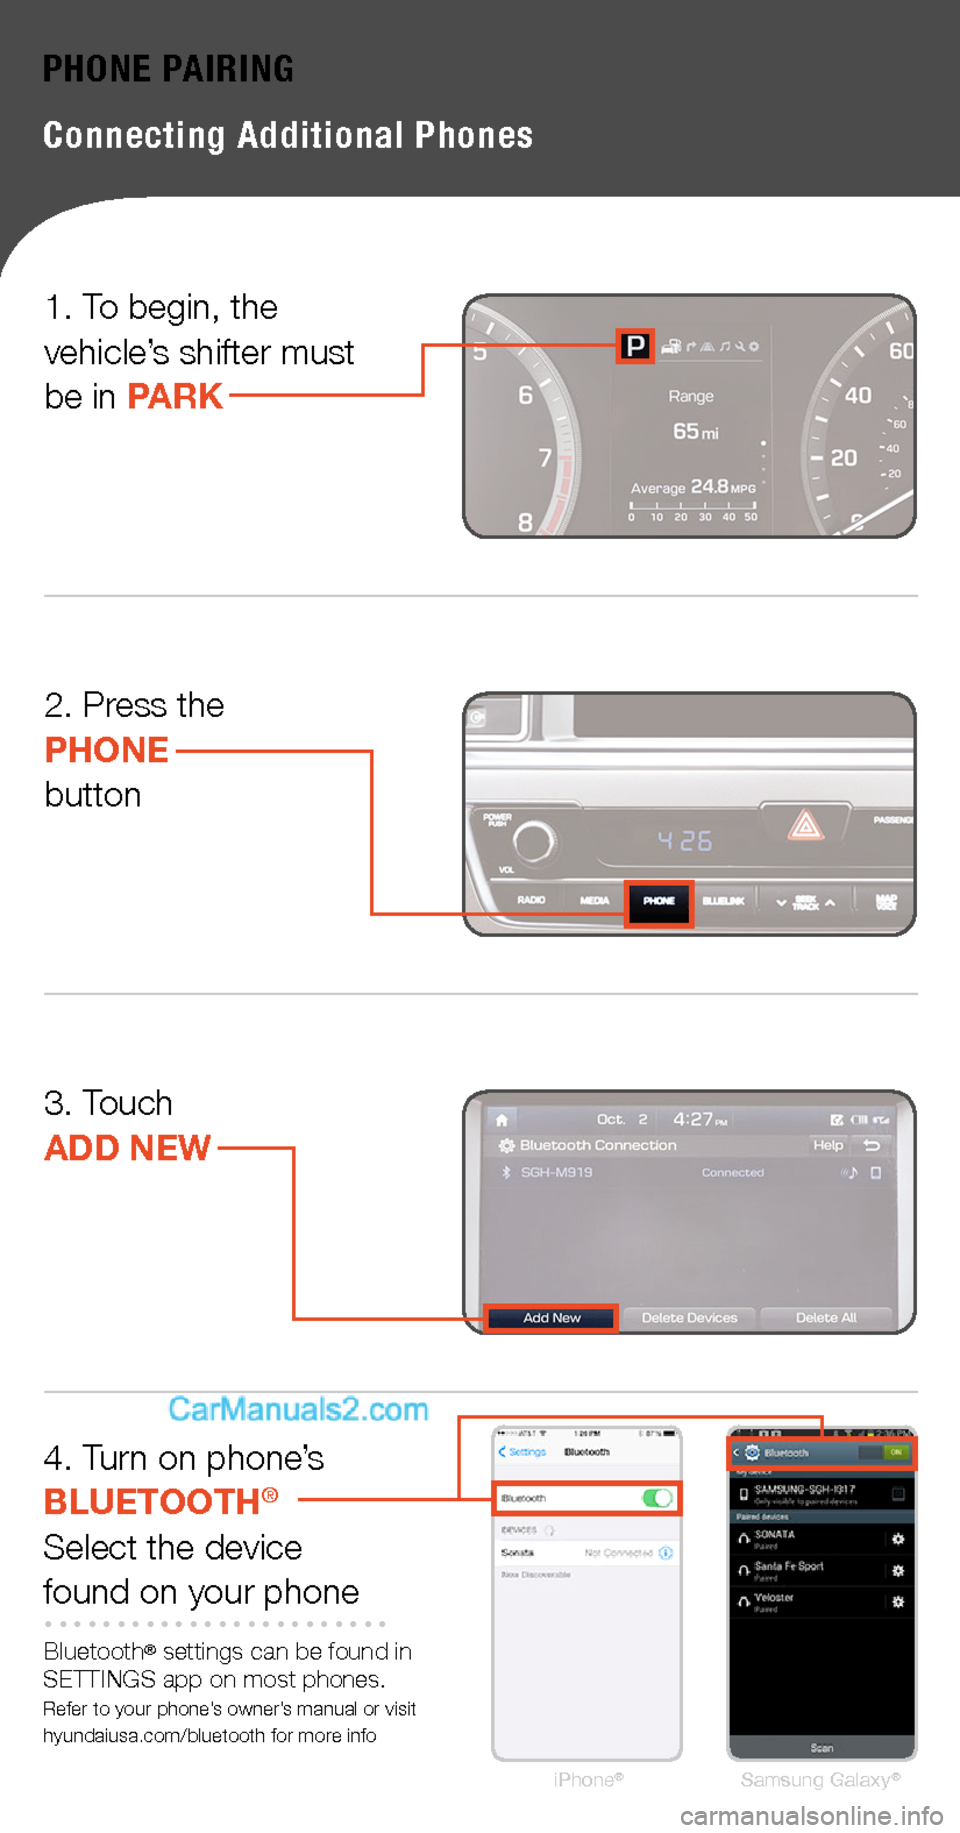 Hyundai Sonata 2015  Quick Tips PHONE PAIRING
Connecting Additional Phones
1. To begin, the vehicle’s shifter must  be in PARK
2. Press thePHONEbutton
3. Touch  ADD NEW
4. Turn on phone’s  BLUETOOTH®
Select the devicefound on y